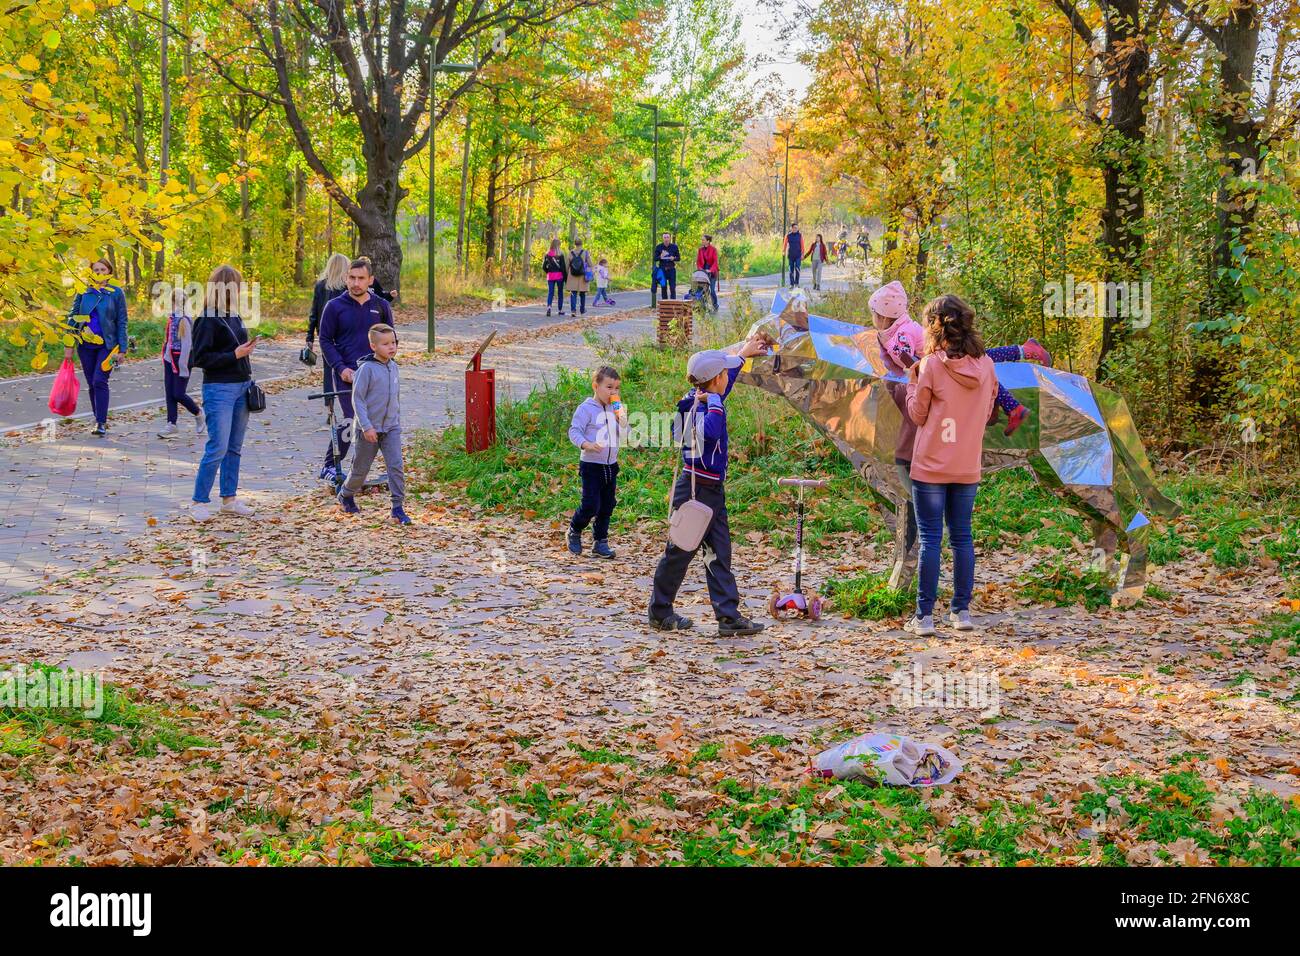 Kazan, Russia - October 03, 2020: Children with their parents are photographed next to a metal sculpture of an animal in the city's public park on an Stock Photo